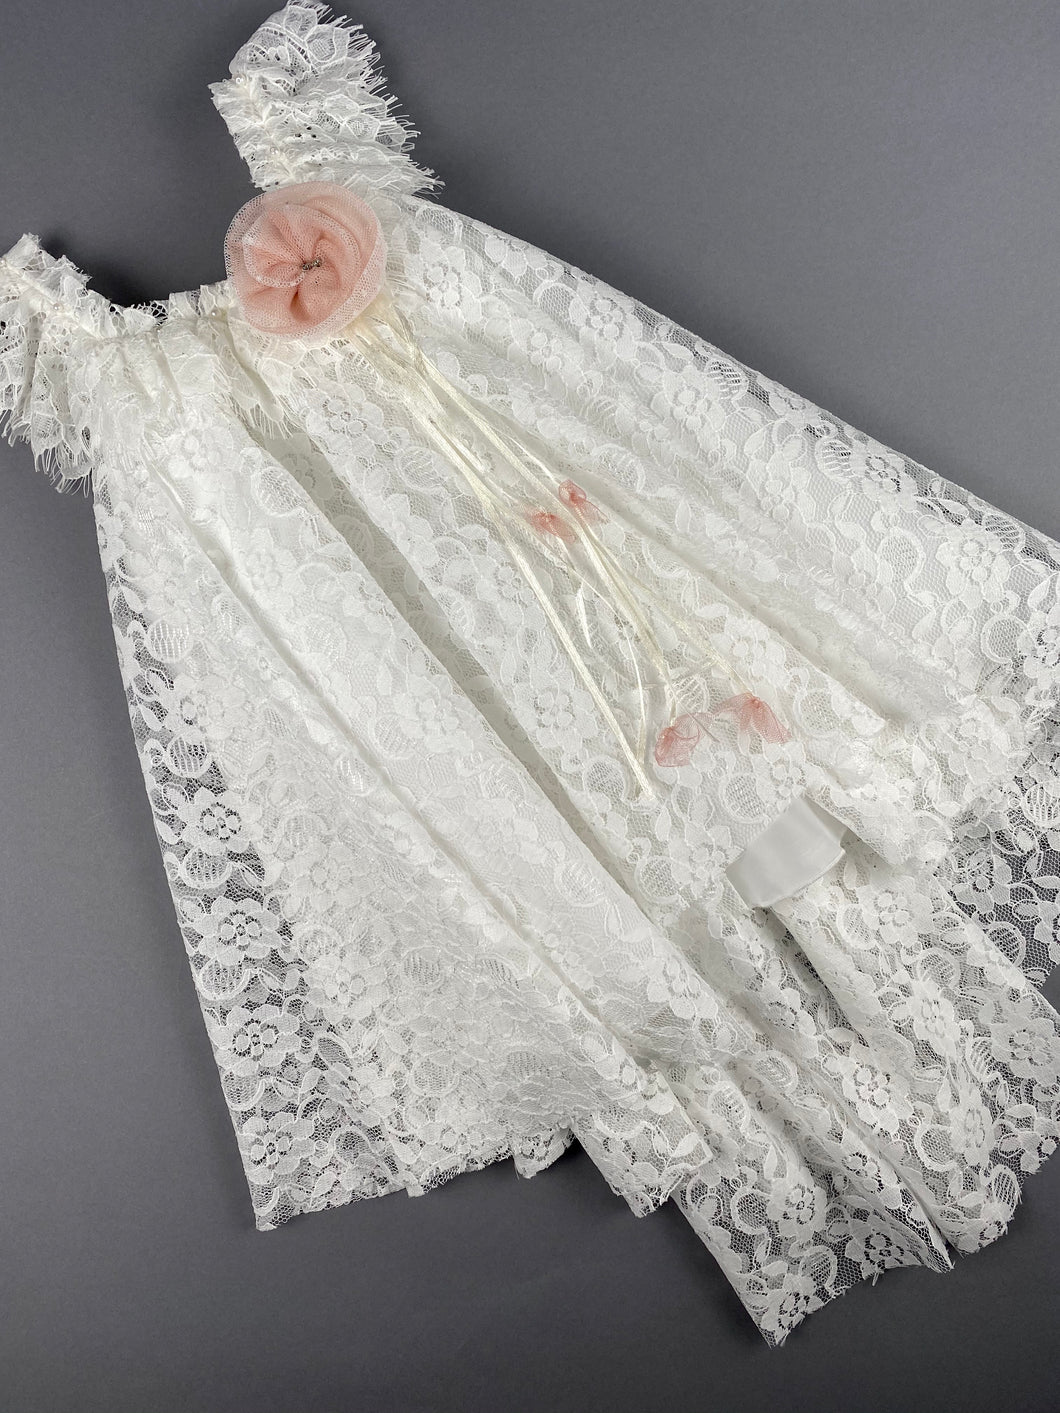 Dress 41 Girls Baptismal Christening Sleeveless  3pc French Lace Dress with long trail, matching Bolero and Hat. Made in Greece exclusively for Rosies Collections.